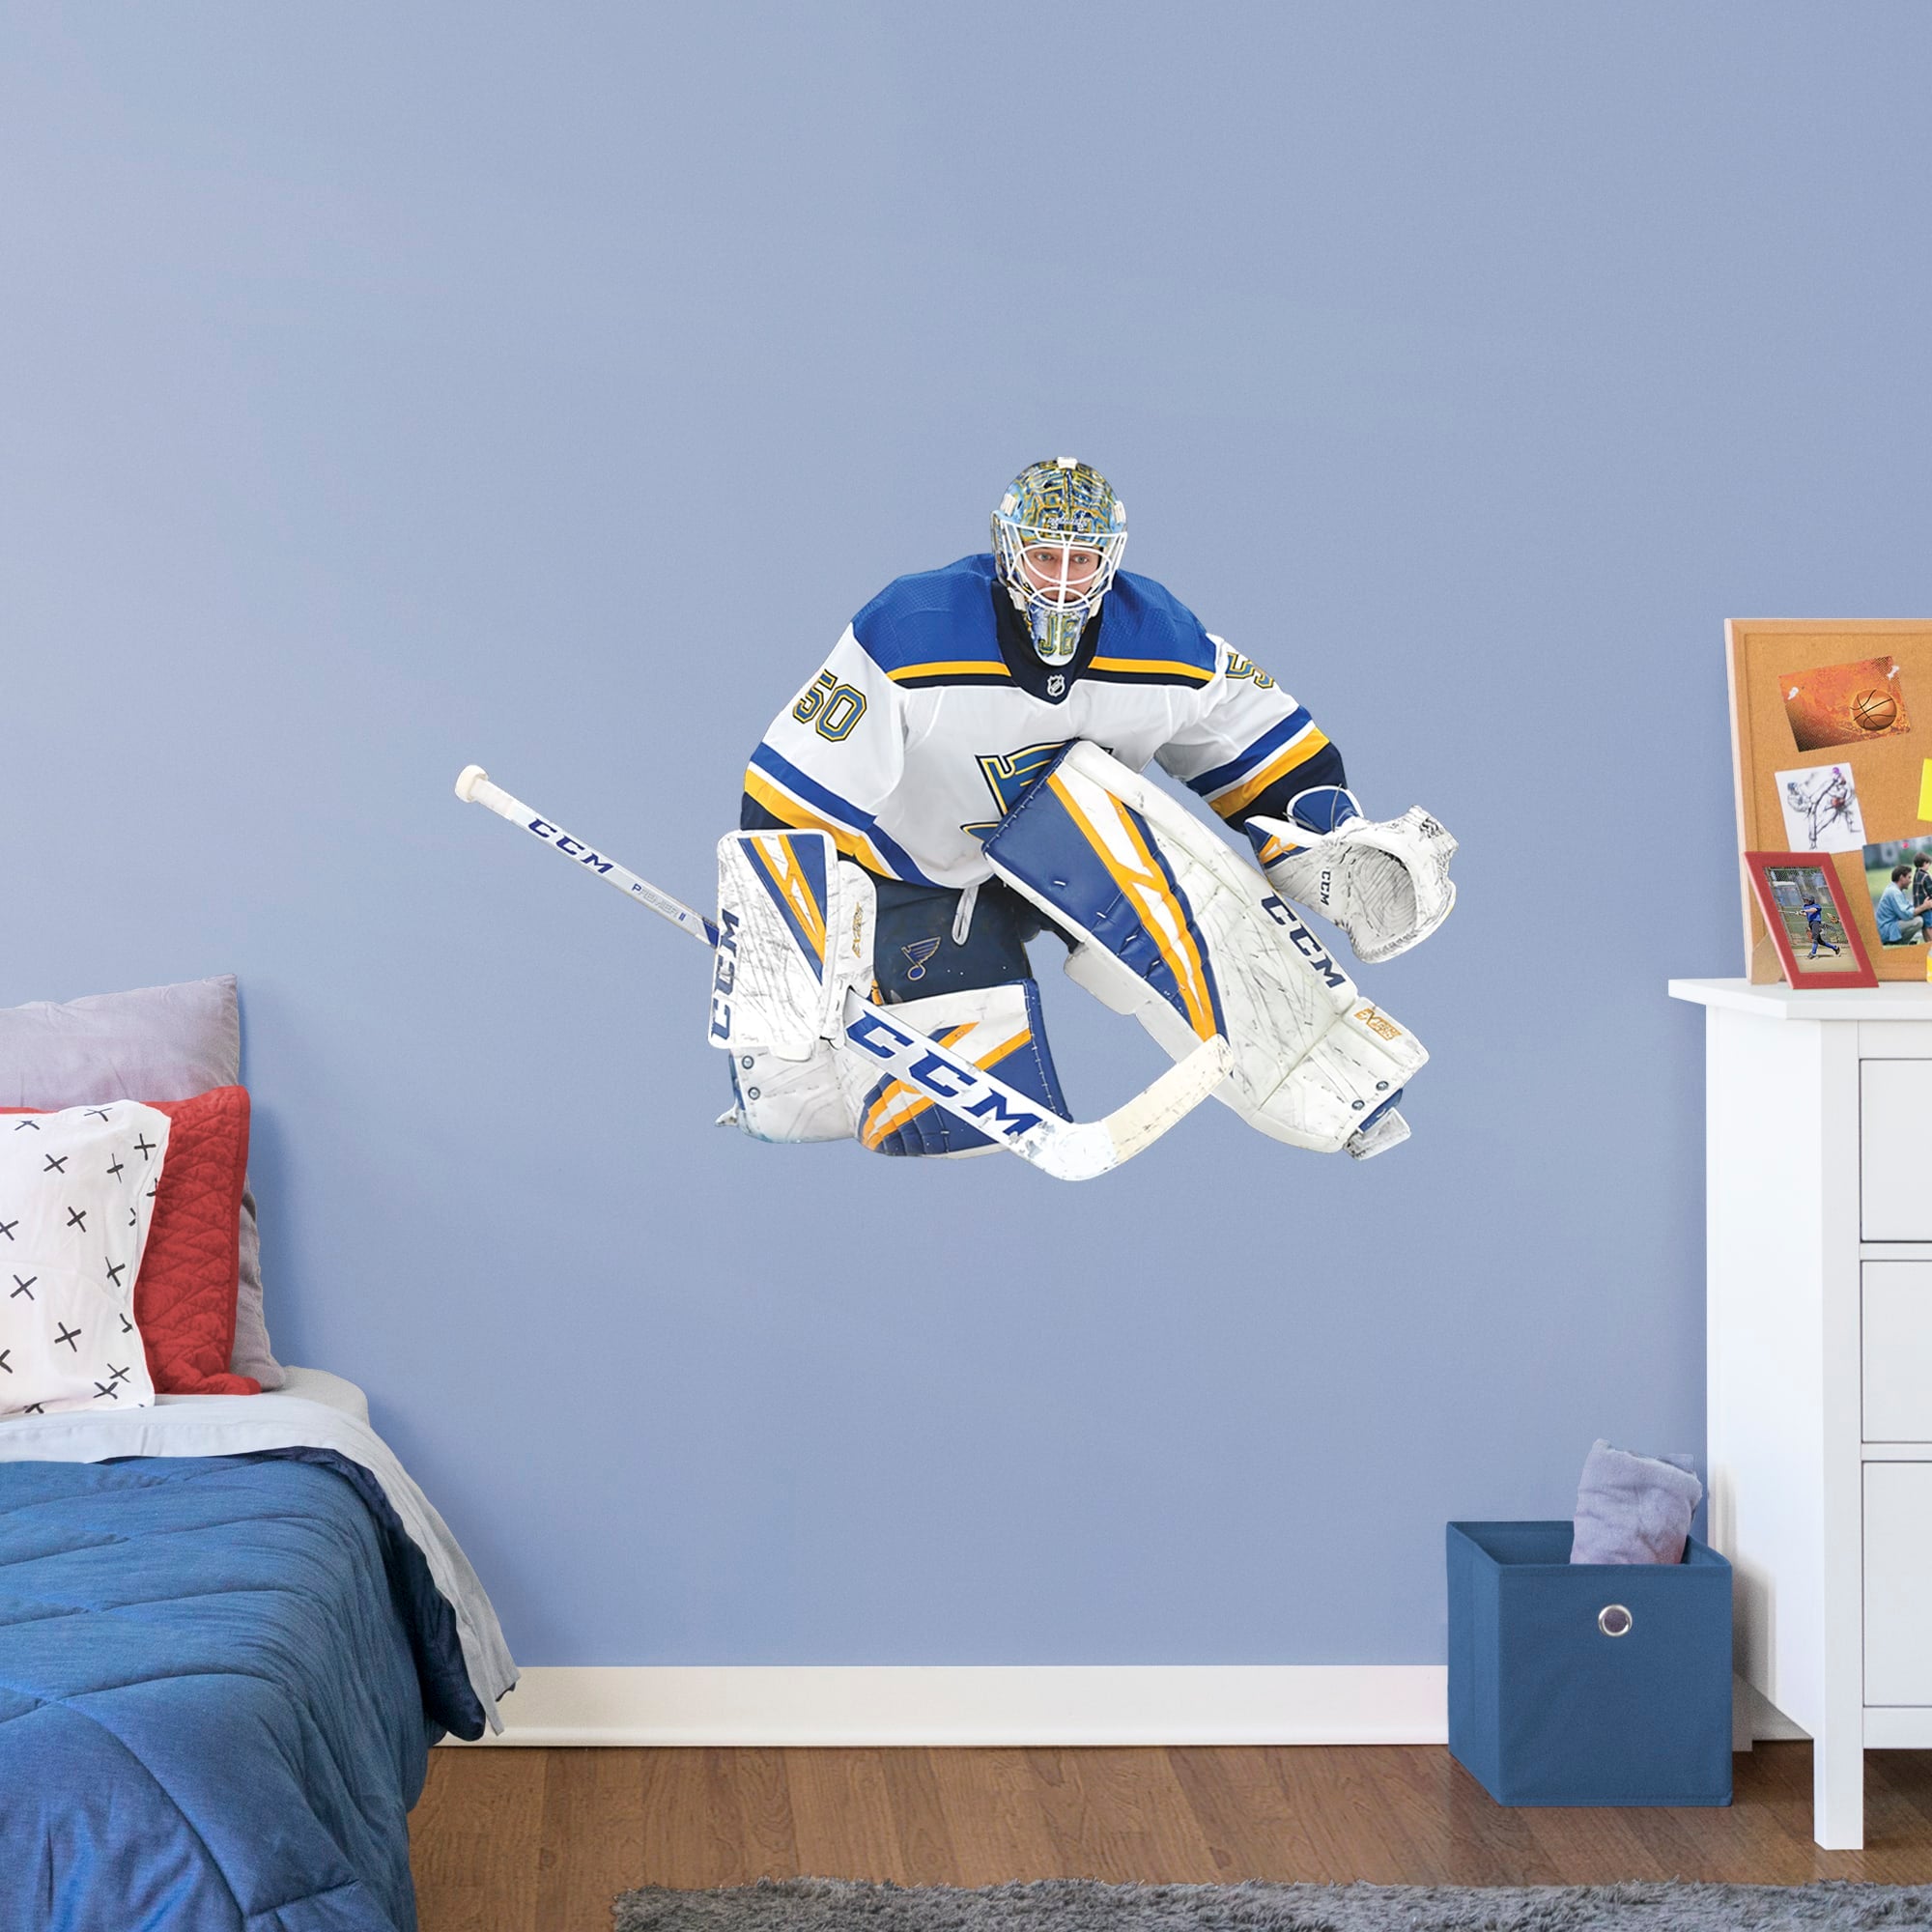 Jordan Binnington for St. Louis Blues - Officially Licensed NHL Removable Wall Decal Giant Athlete + 2 Team Decals (50"W x 36"H)